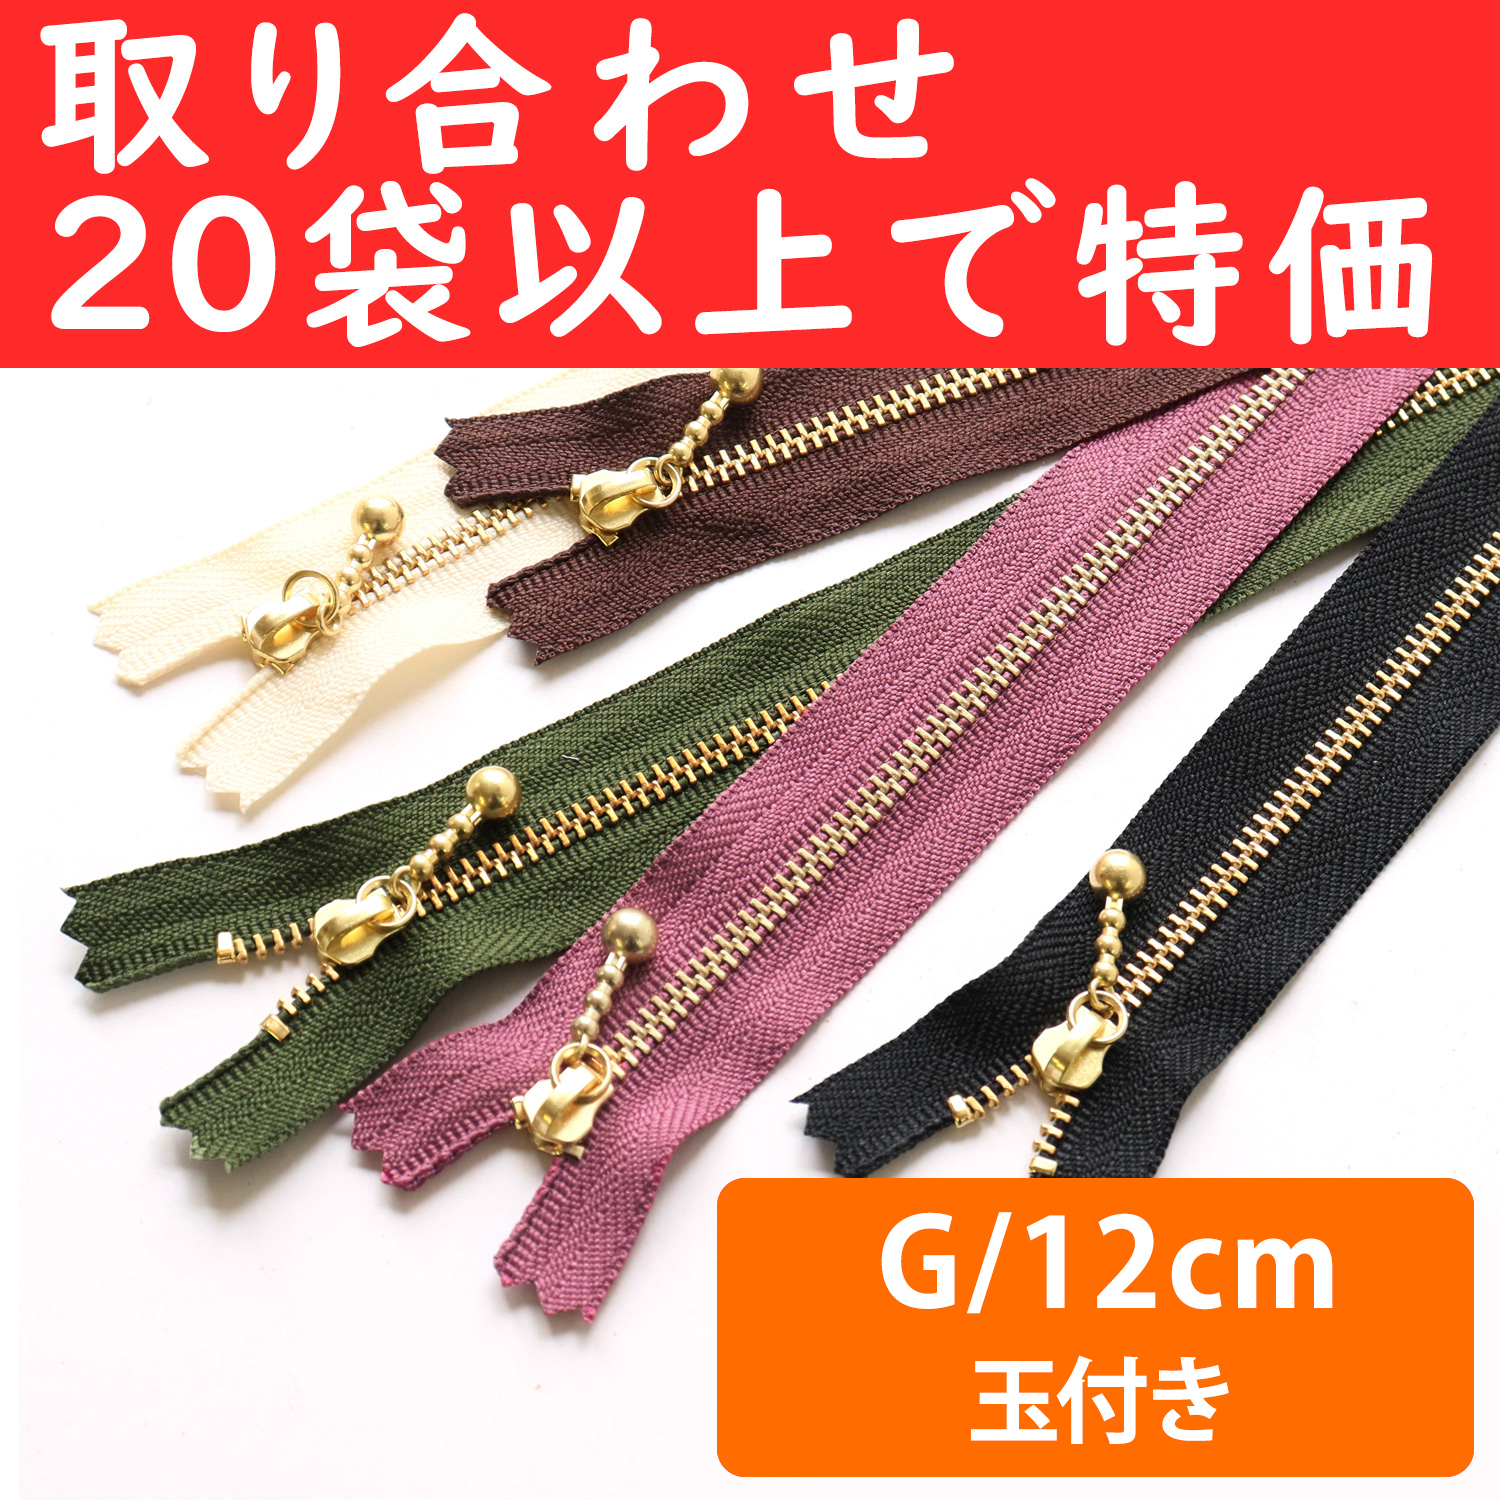 3G12-OVER200 Special)Ball Pull Zippers  G 12cm ", orders with 20 bags or more (bag)